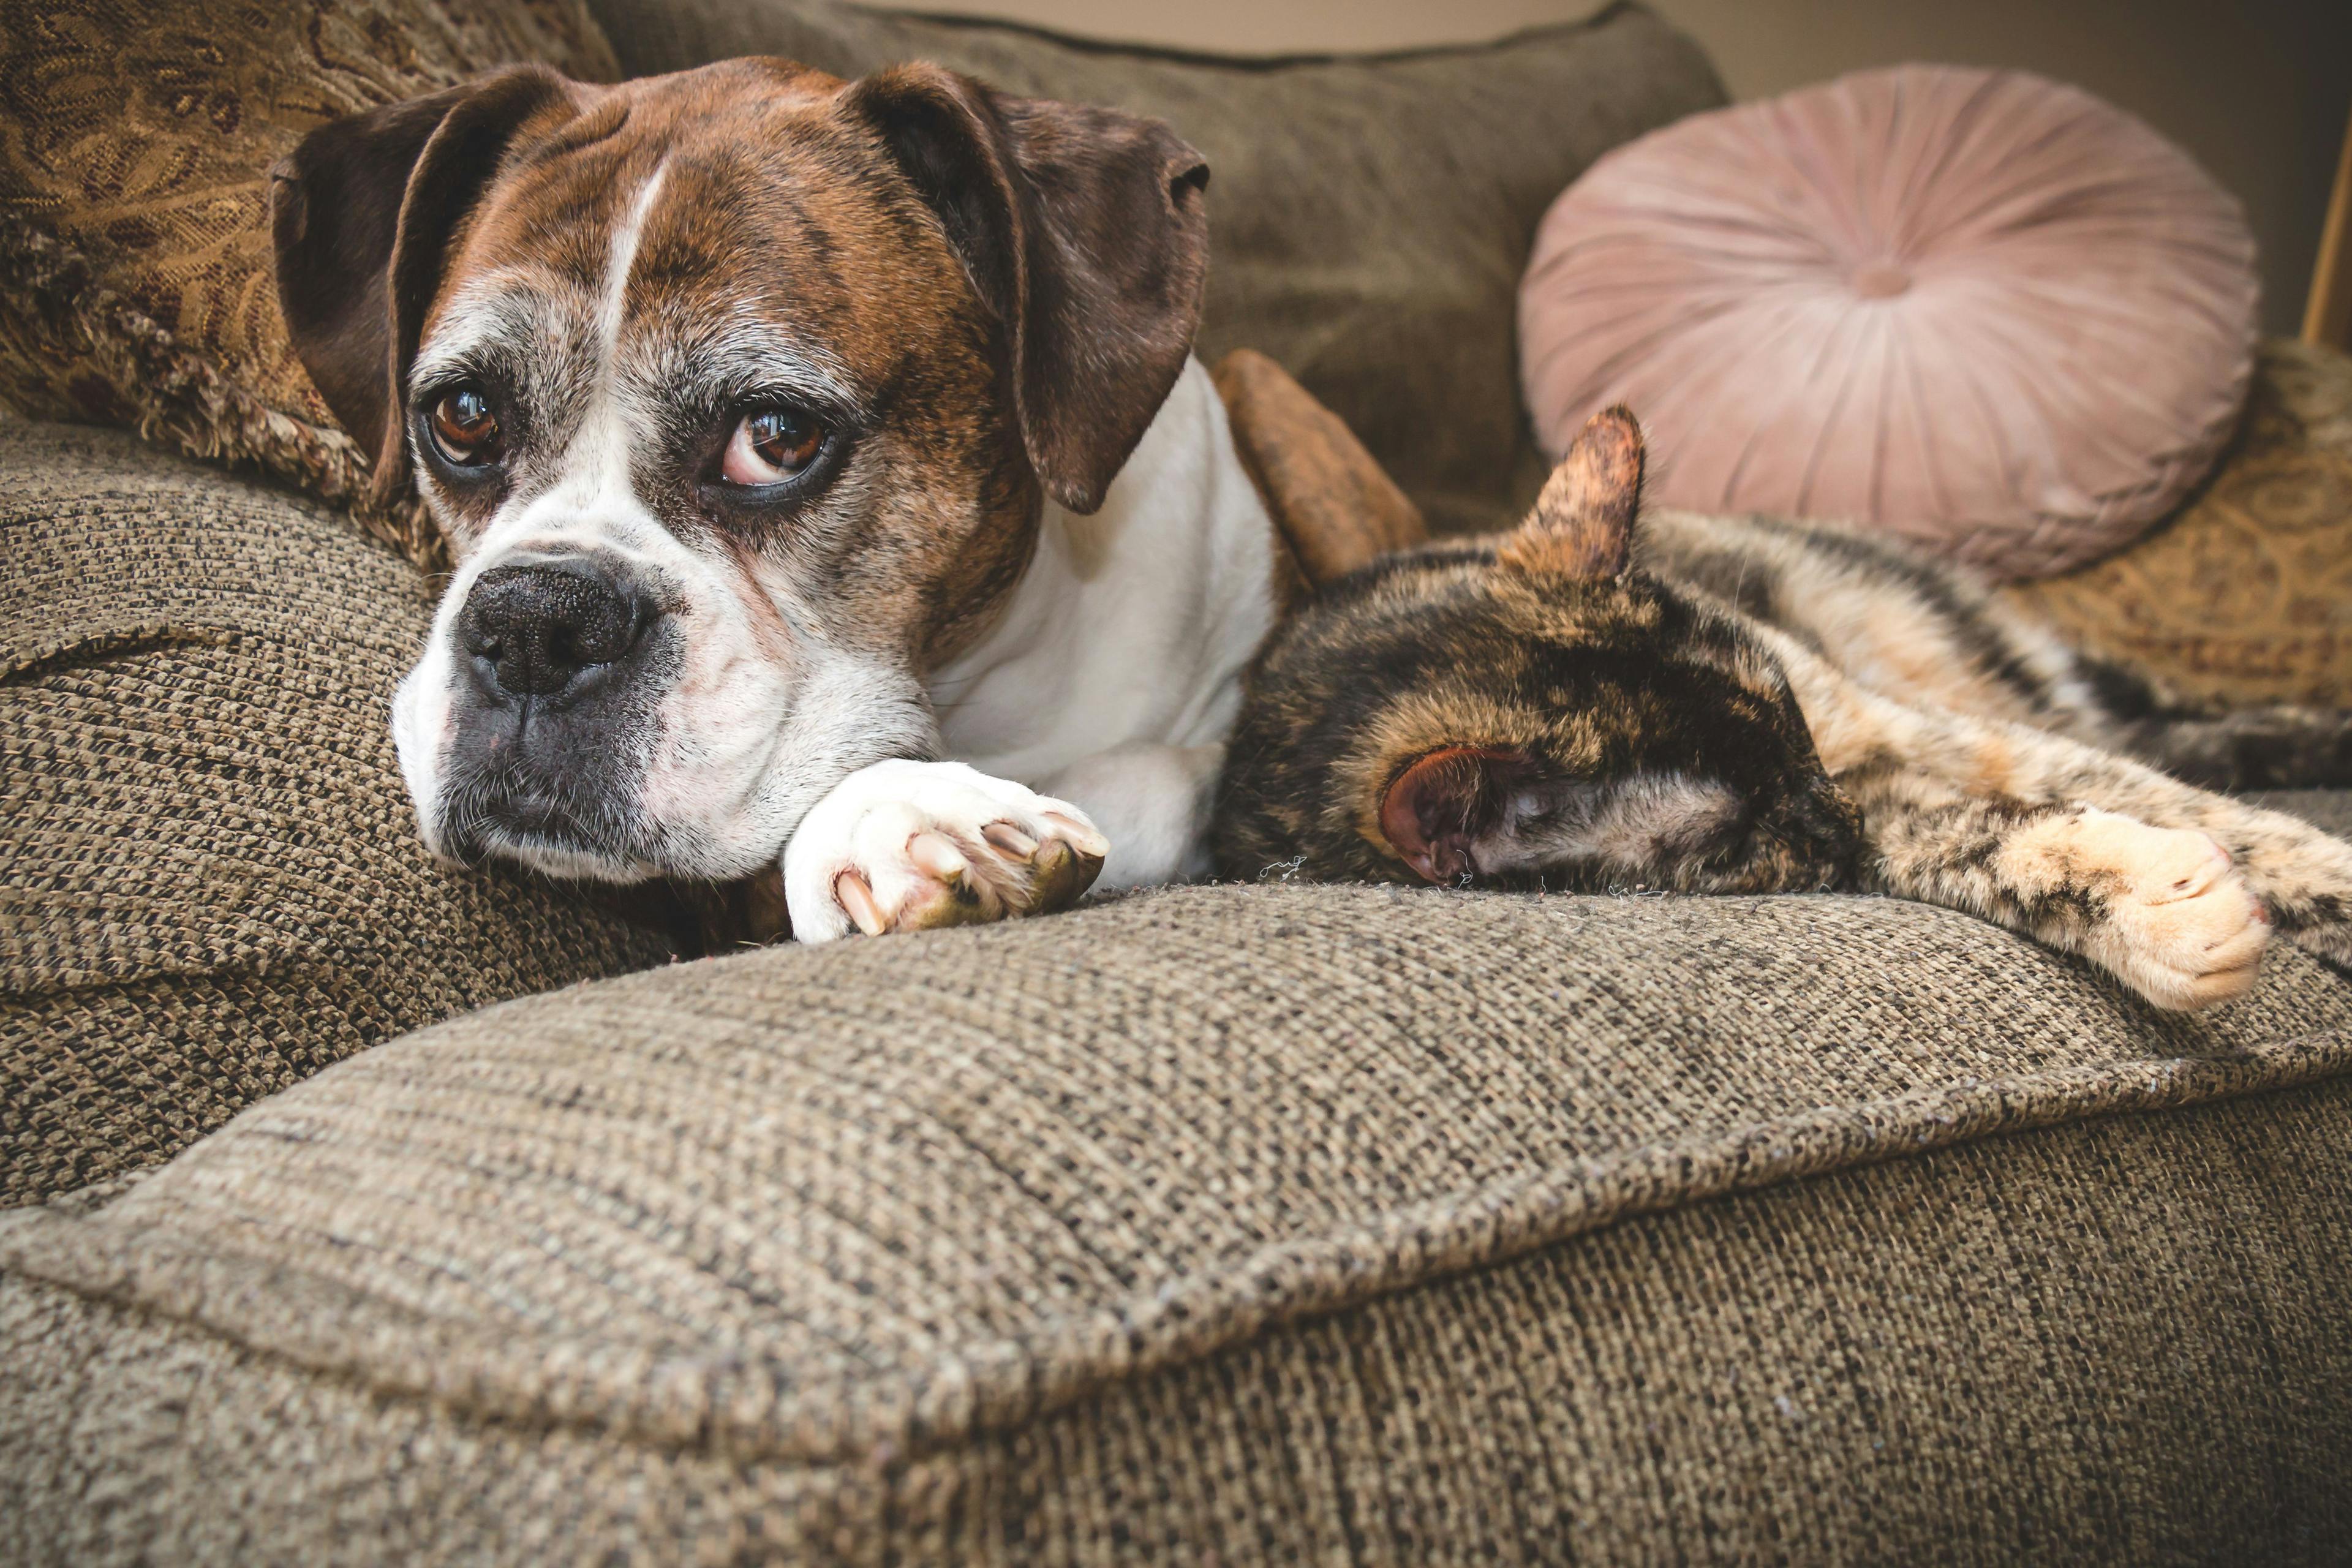 AAHA announces new senior care guidelines for dogs and cats 